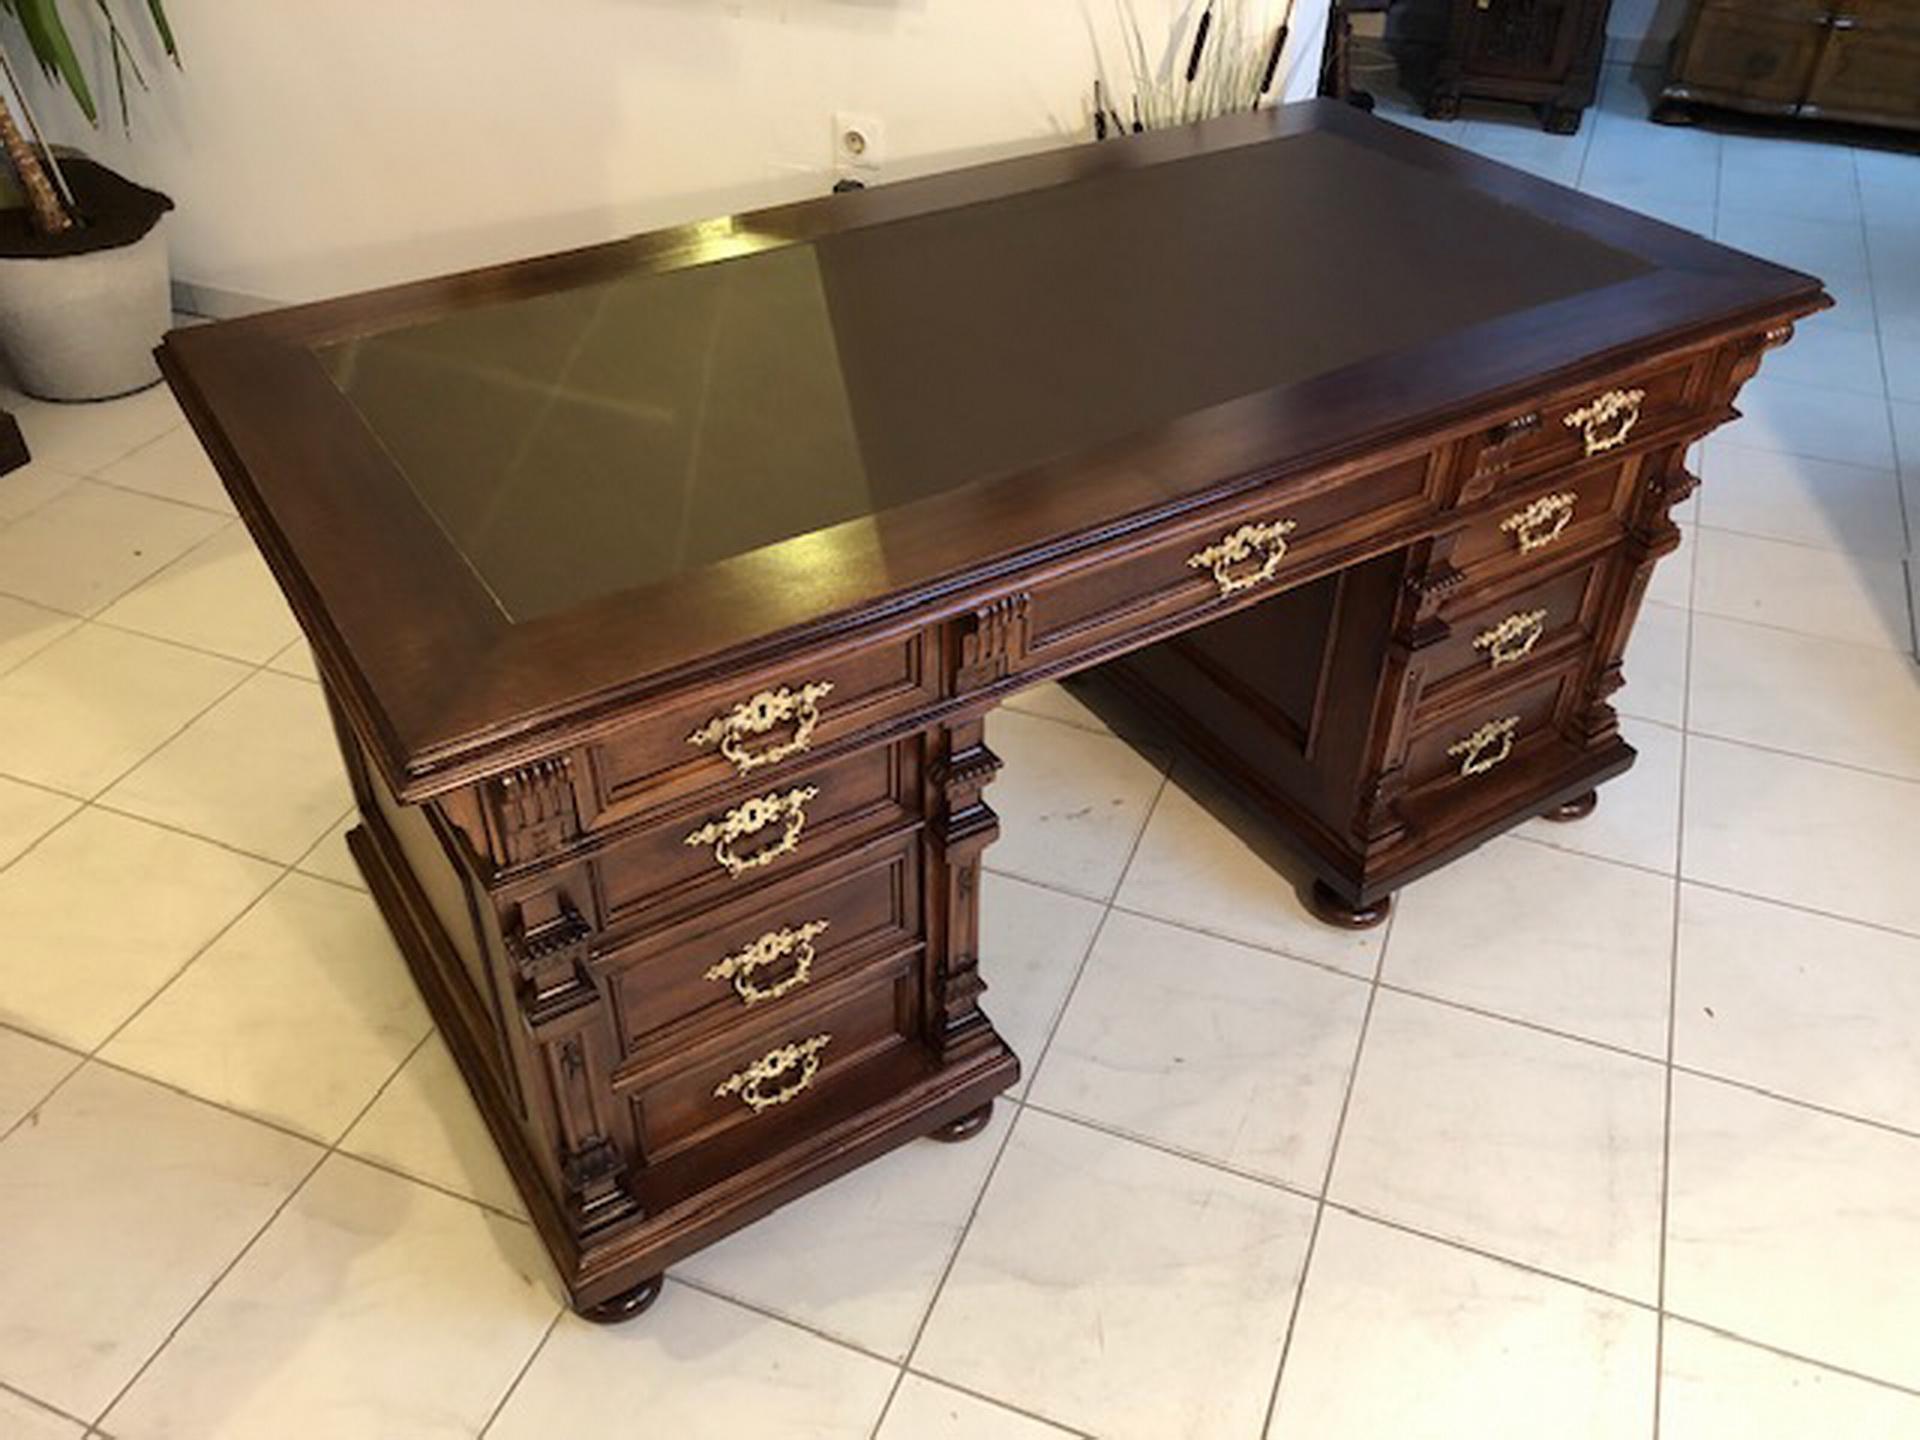 This is a handsome, recently restored, Wilhelminian-style secretary, made, circa 1885.The stunning writing table is an eye-catcher in your study or office, featuring nine lockable drawers. The desk is in a very good original, shellac polished